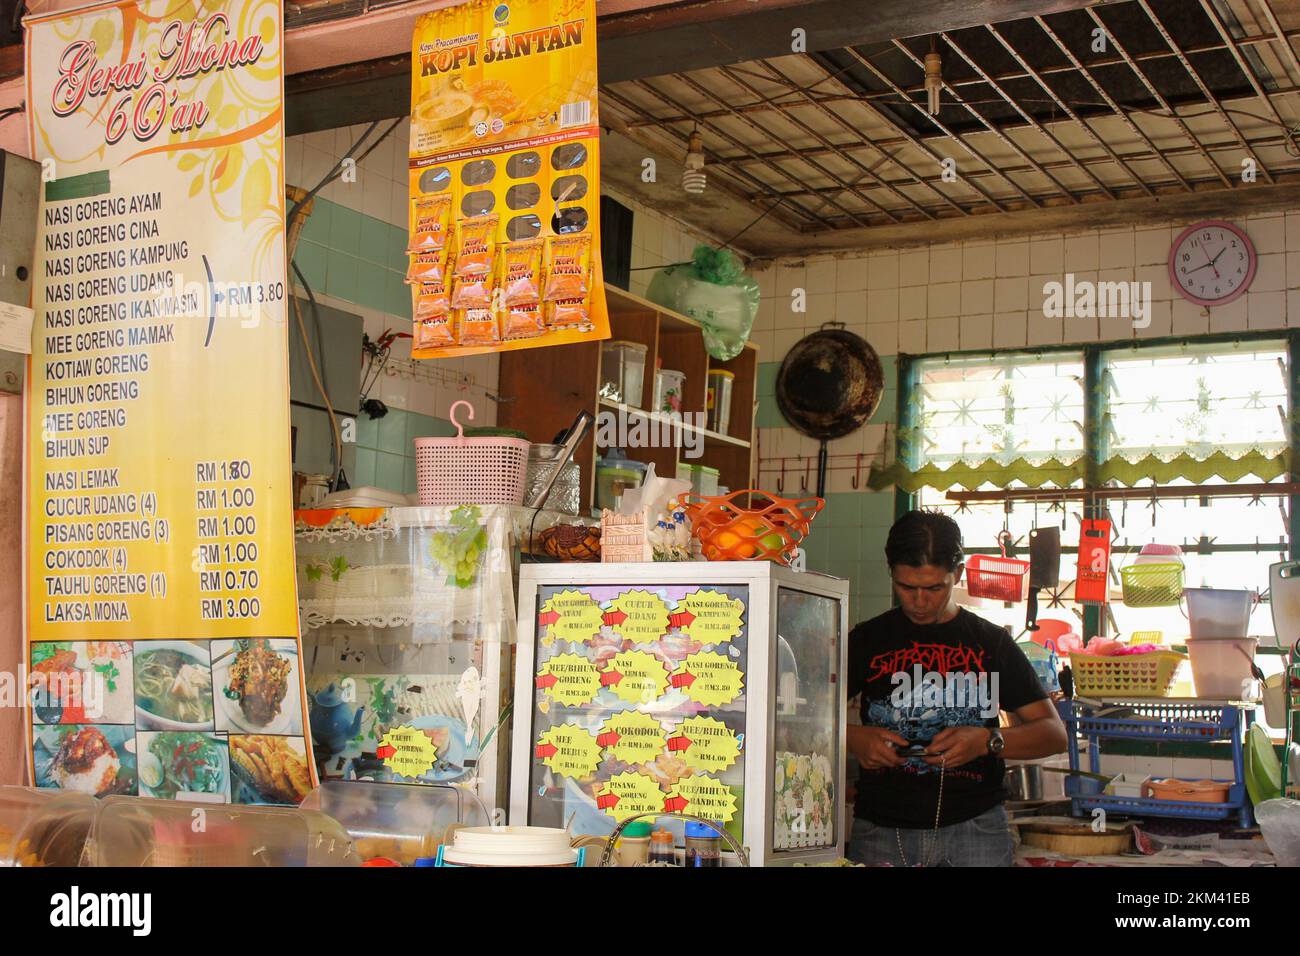 Ipoh, Perak, Malaysia - November 2012: A street stall serving a variety of Indonesian dishes in a food court in the town of Ipoh. Stock Photo